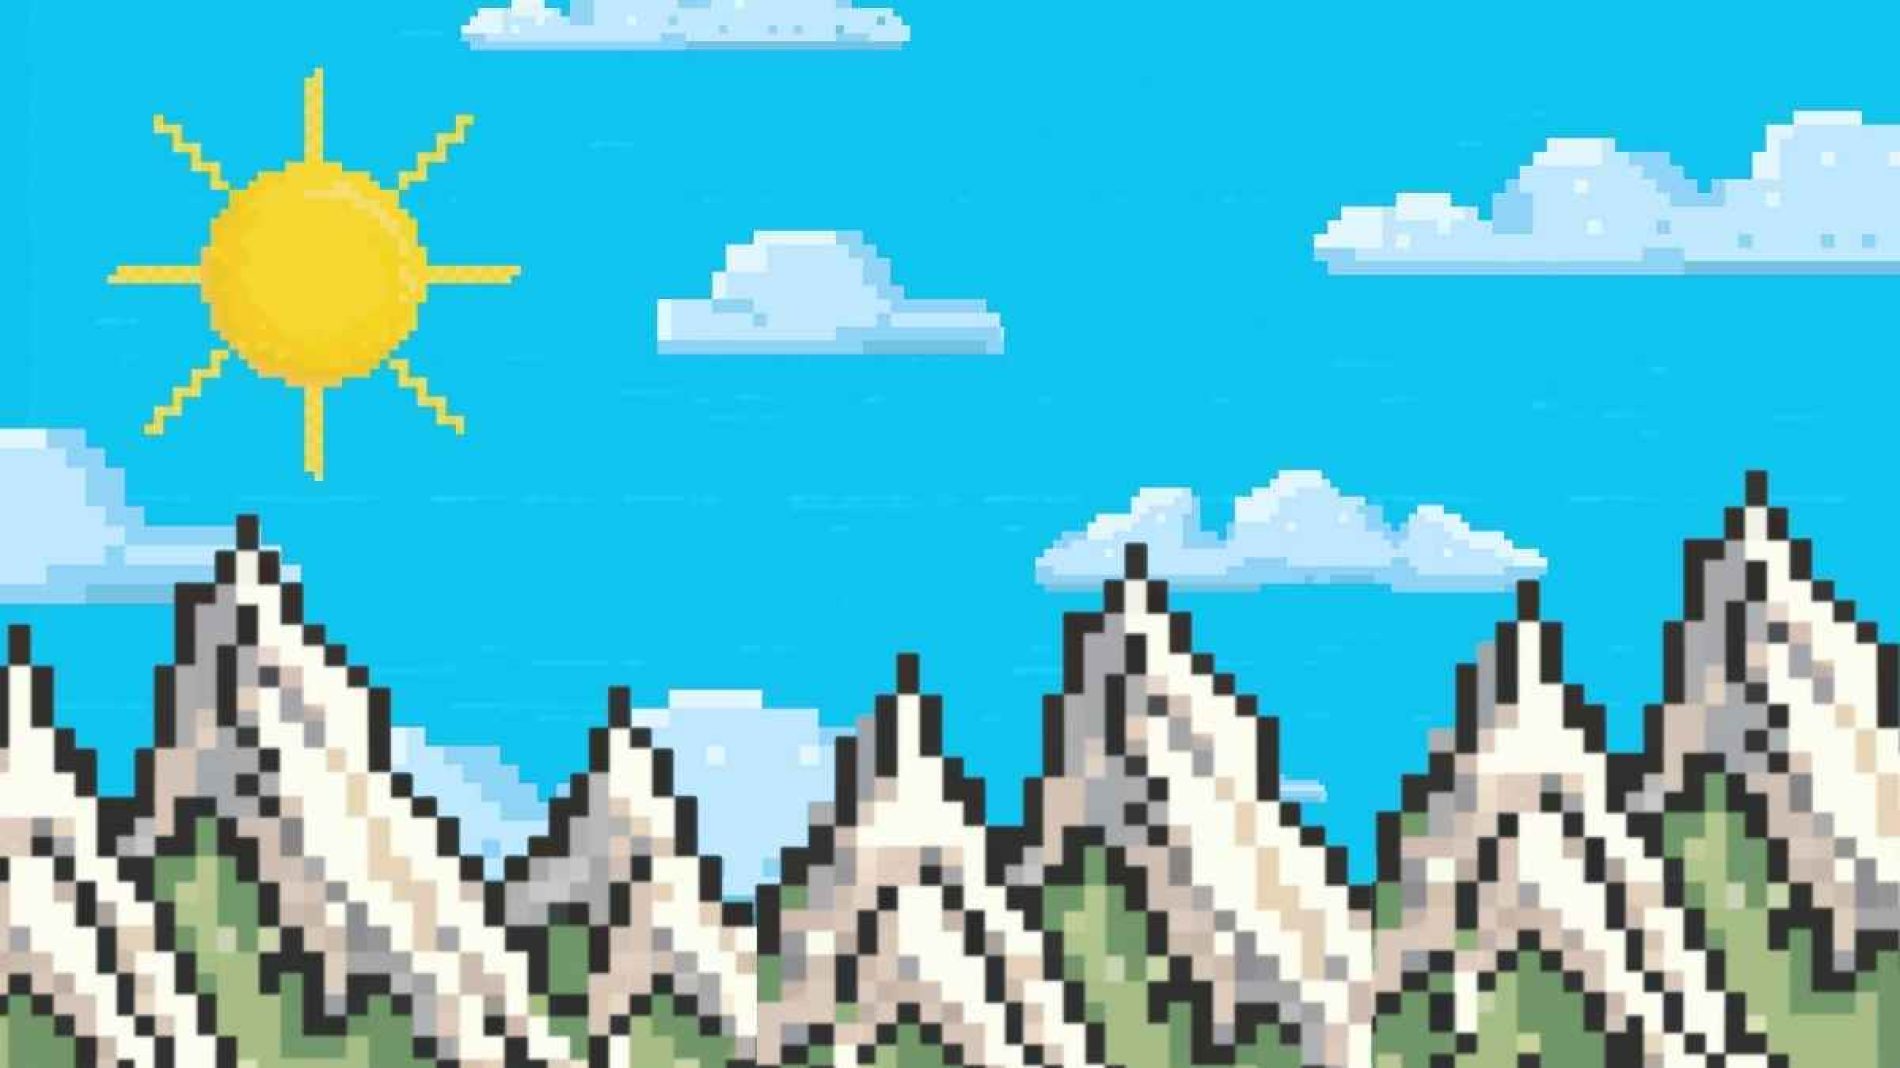 Pixel art style illustration of mountains clouds and sun